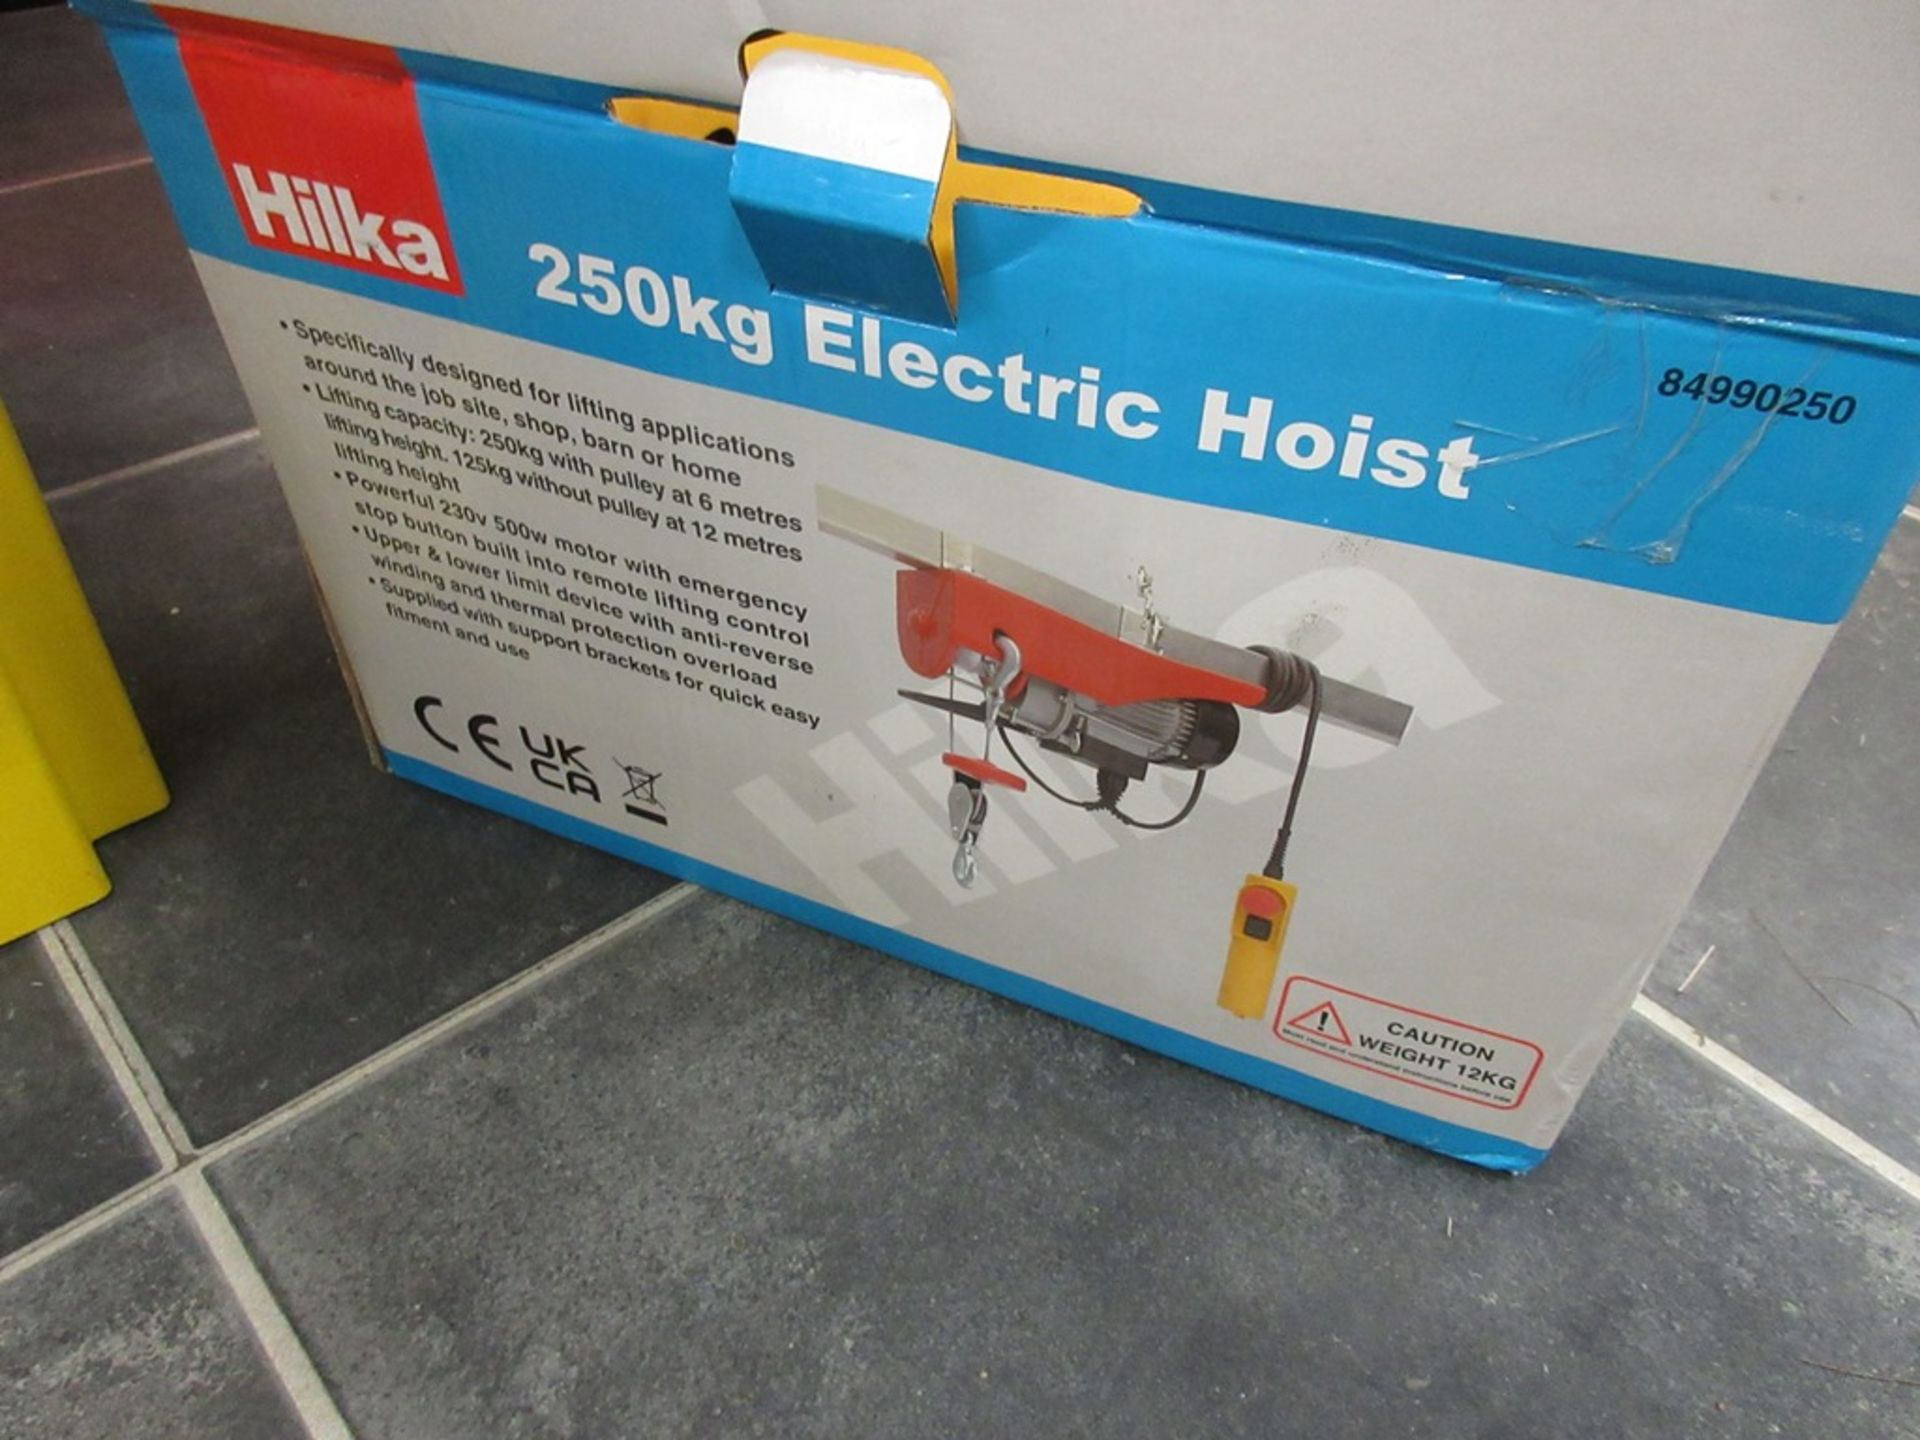 Hilka 250kg electric hoist NB: This item has no record of Thorough Examination. The purchaser must